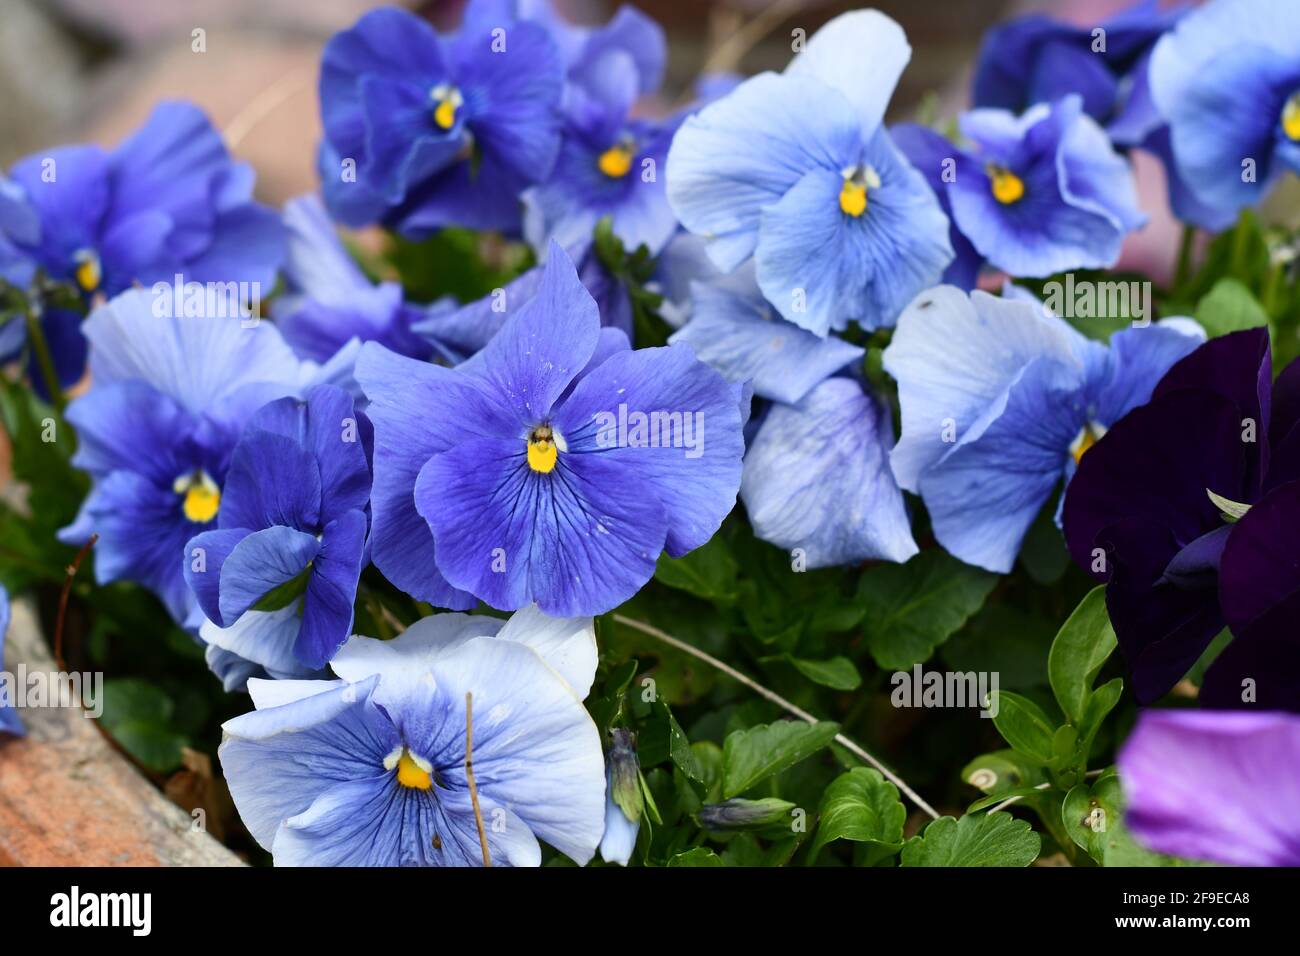 Stunning large pansy heads in shades of blue Stock Photo